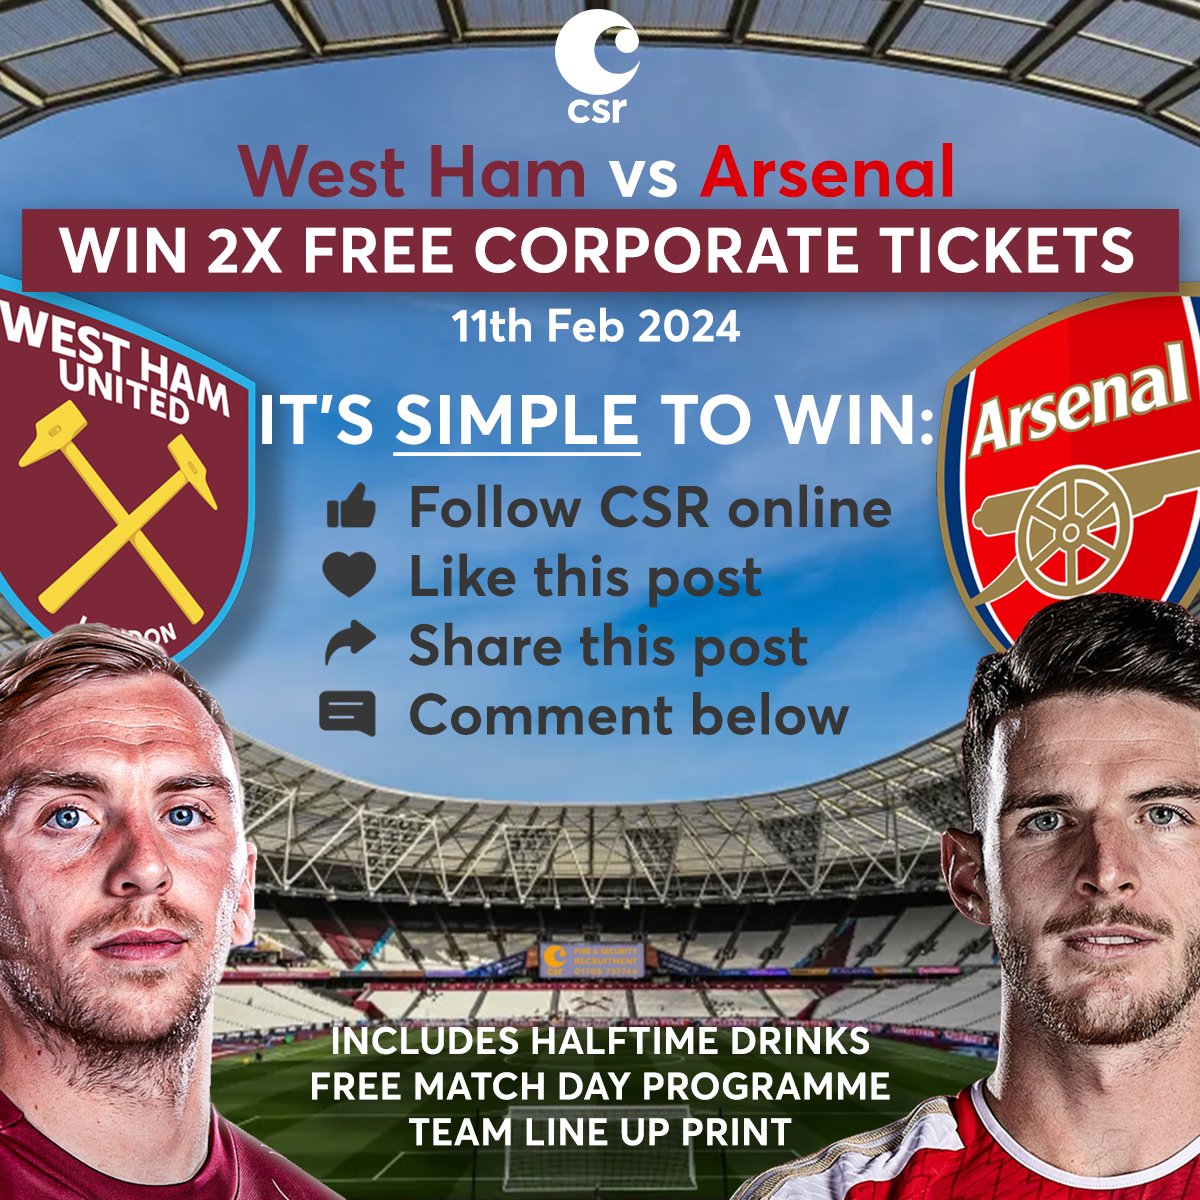 🔥 Win tickets to the London Derby 11 Feb! It's easy to enter: 1️⃣ Follow our company page 2️⃣ Like this post 3️⃣ Share this post on your profile 4️⃣ Comment ‘Arsenal’ or ‘West Ham’ ✅ You could win 2x Free Corporate Tickets, Halftime Drinks, Match Programme, Team Print #WeAreCSR